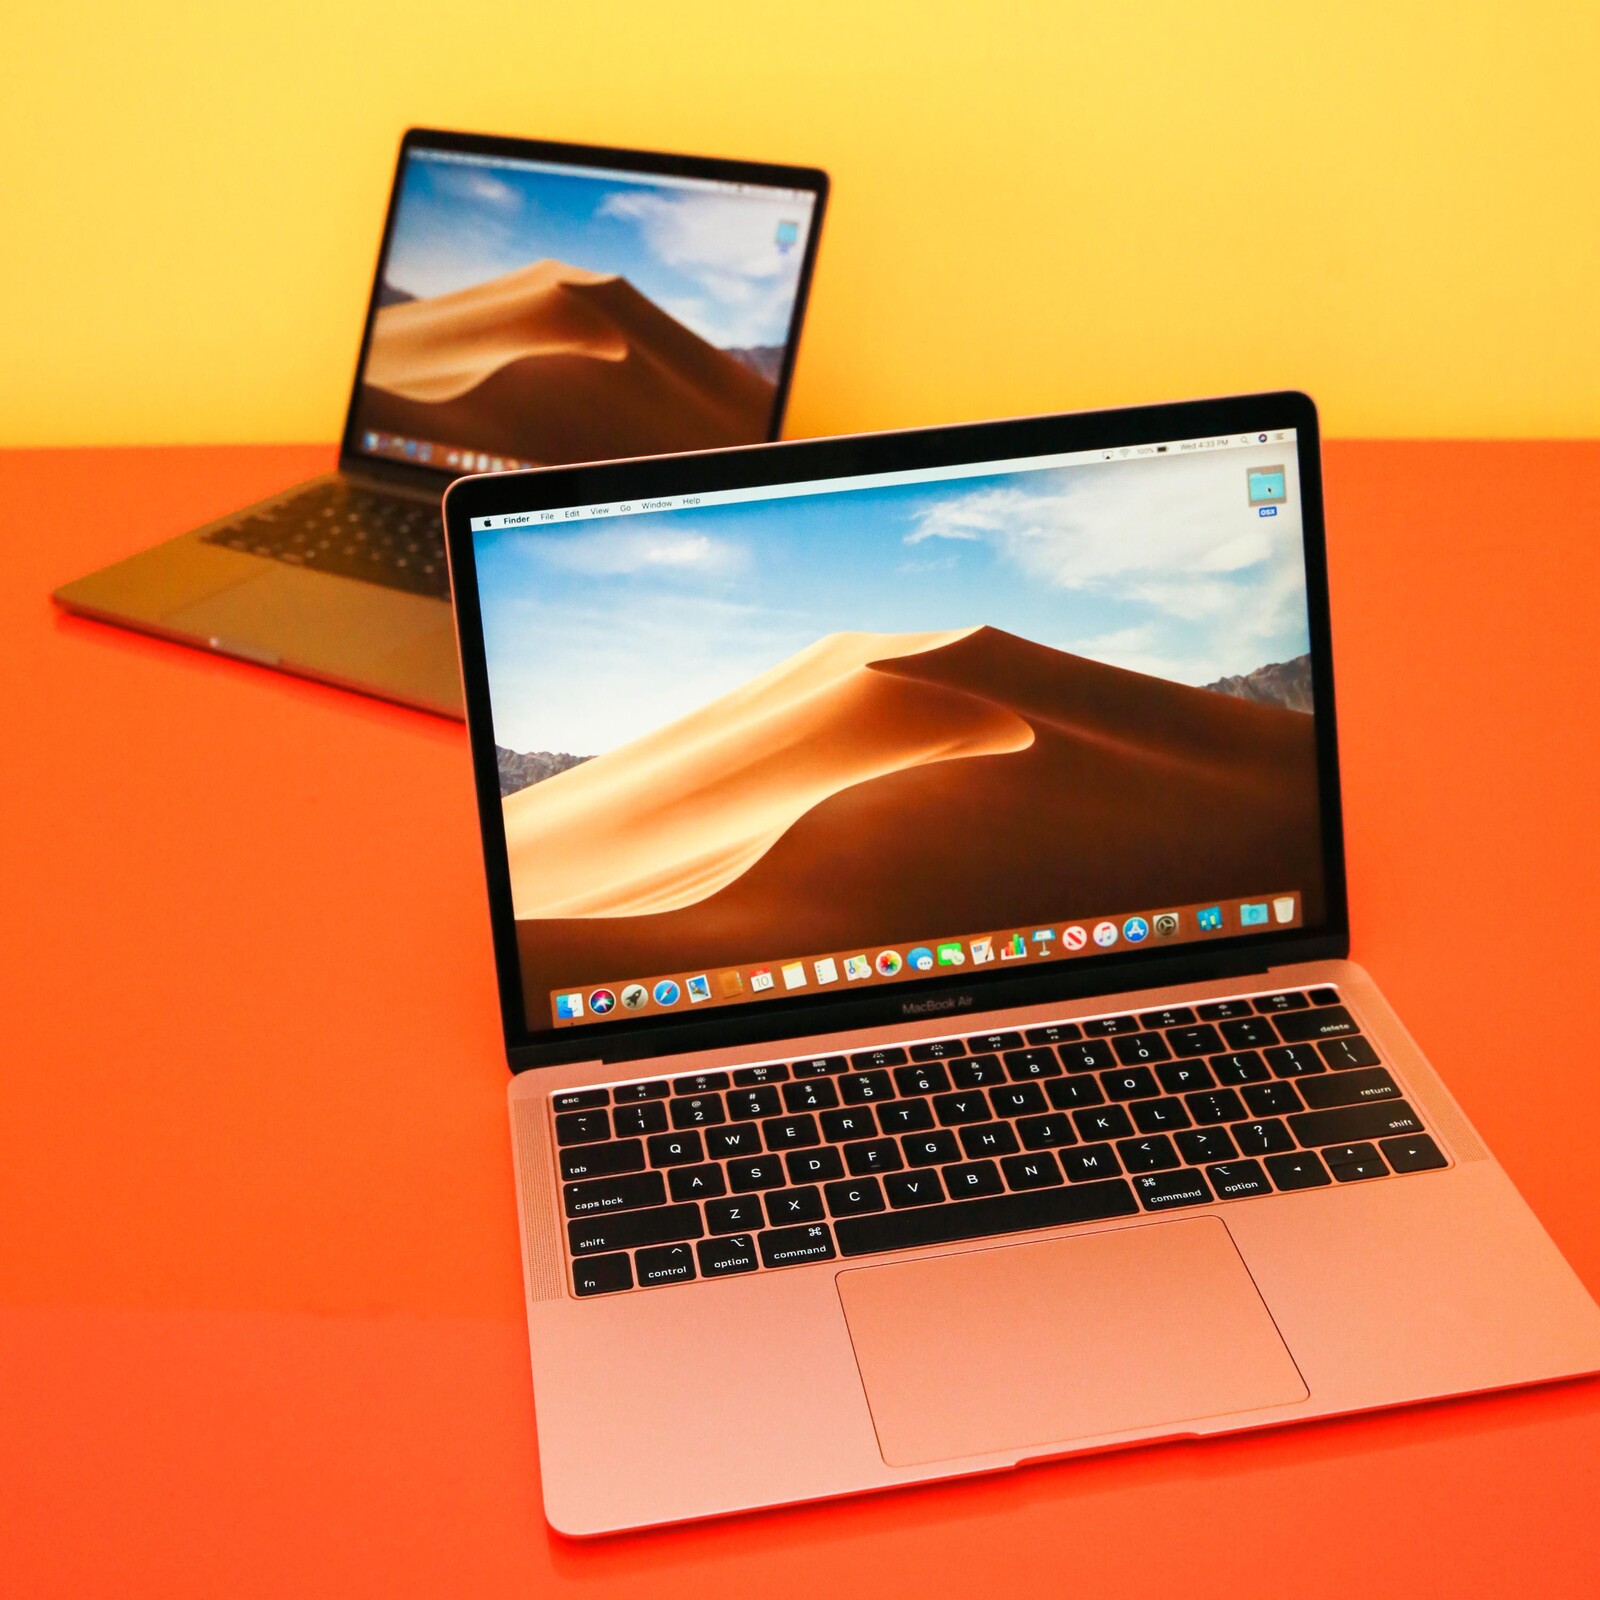 Apple's ARMbased MacBook Air will reputedly launch at US799 with the